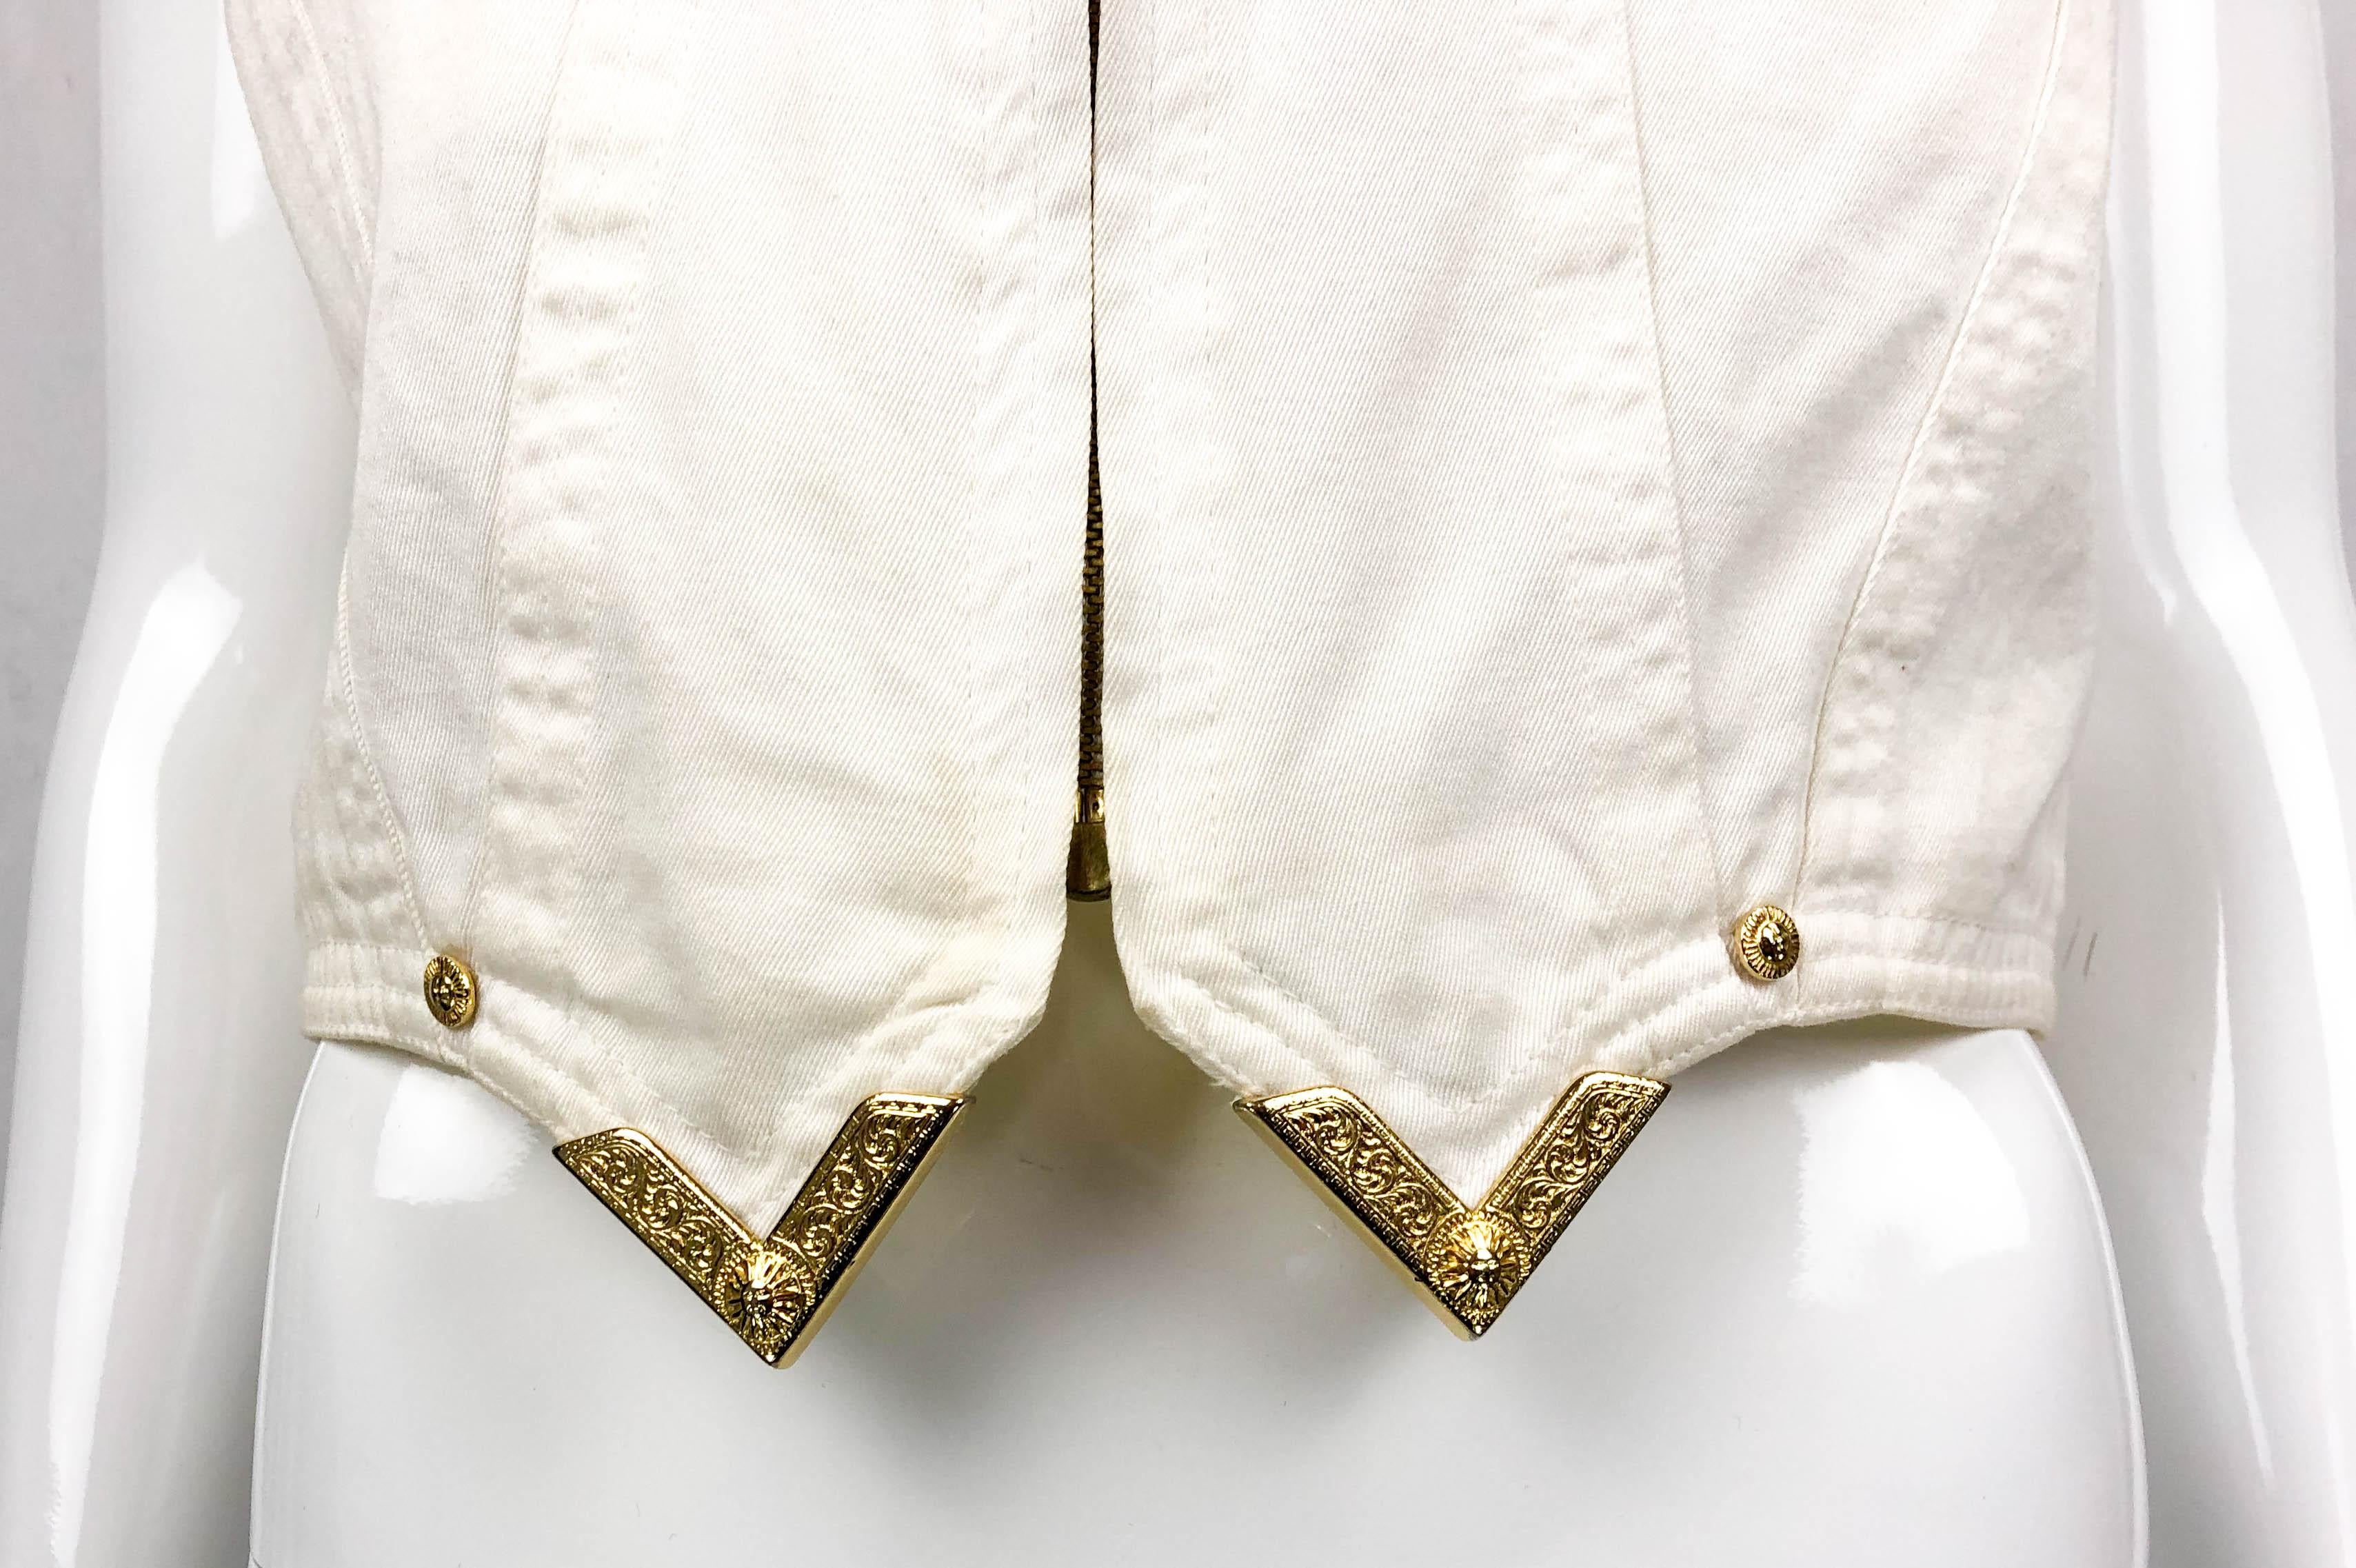 1991 Gianni Versace White Denim Waistcoat With Gilt Tips For Sale 7